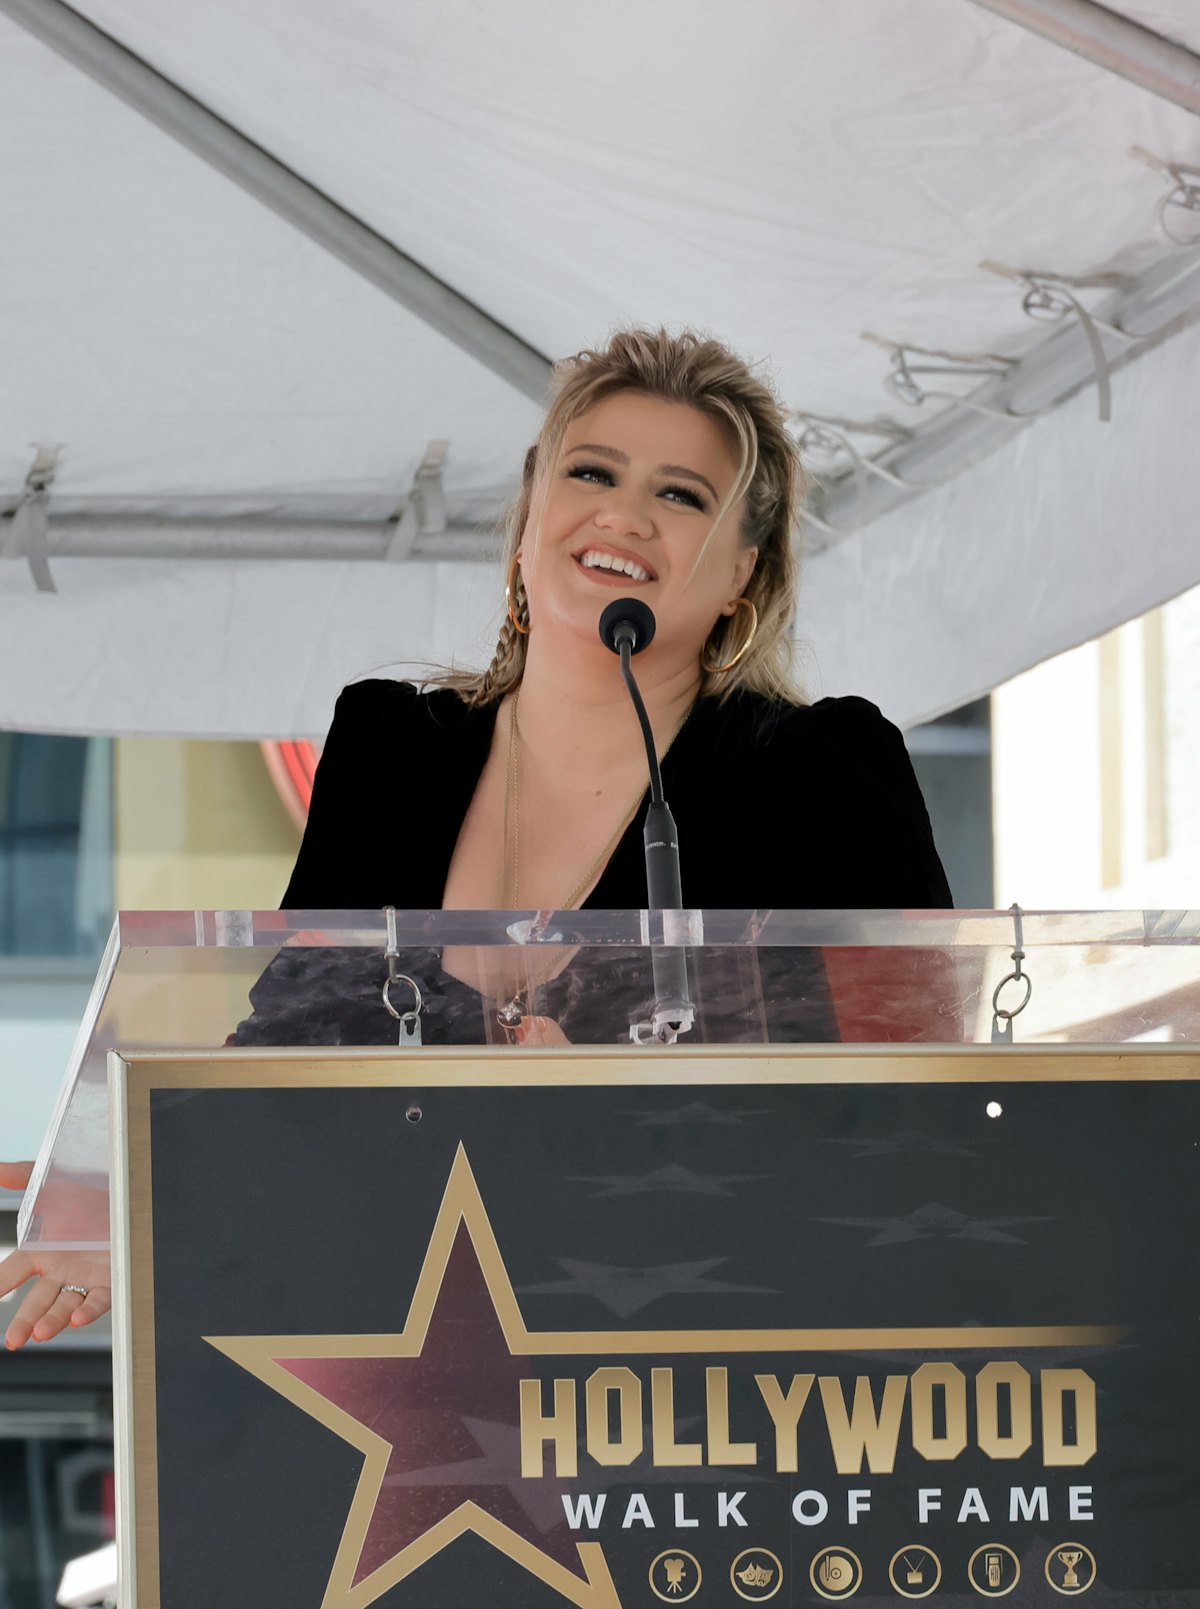 LOS ANGELES, CALIFORNIA - SEPTEMBER 19: Kelly Clarkson speaks onstage during her star ceremony on Th...